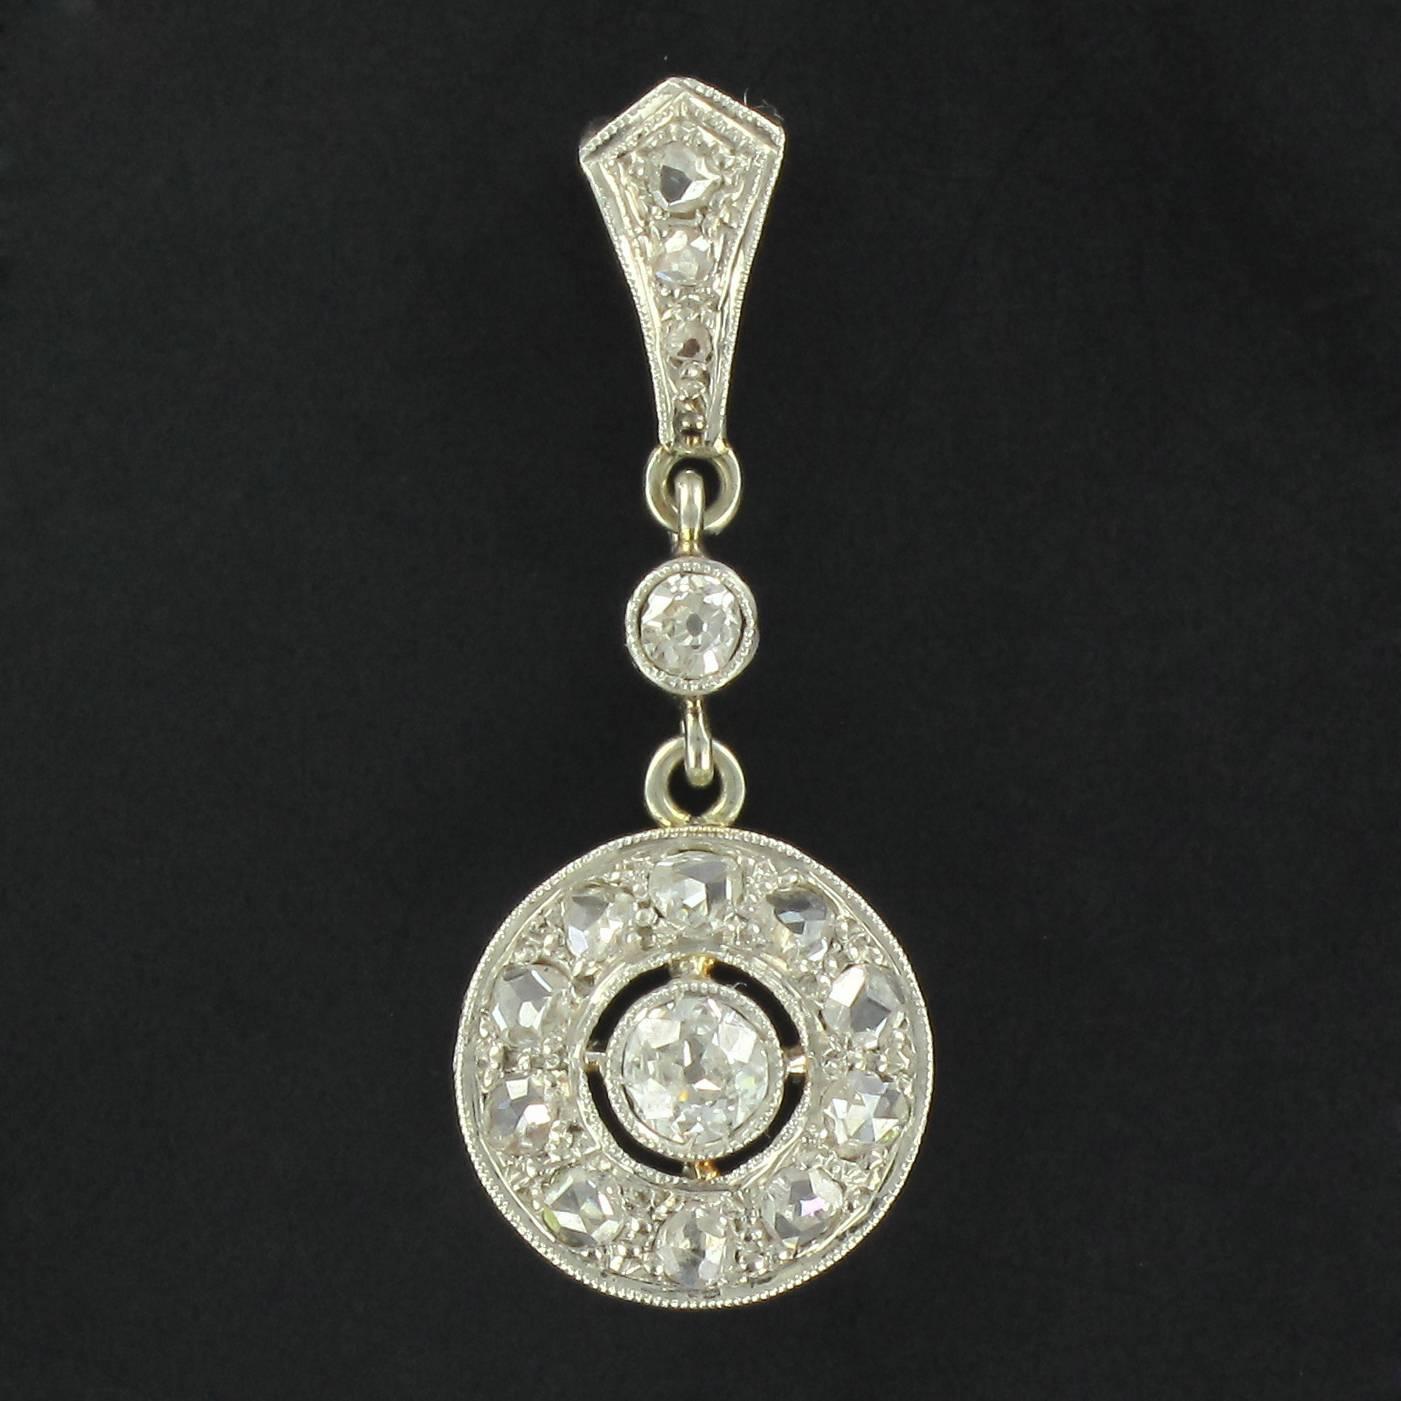 18 carat white gold pendant. 

This splendid round openwork Art Deco pendant features a central bezel set antique brilliant cut diamond surrounded by rose cut diamonds. This round motif is held by a bail set with an ornamented column of 3 rose cut